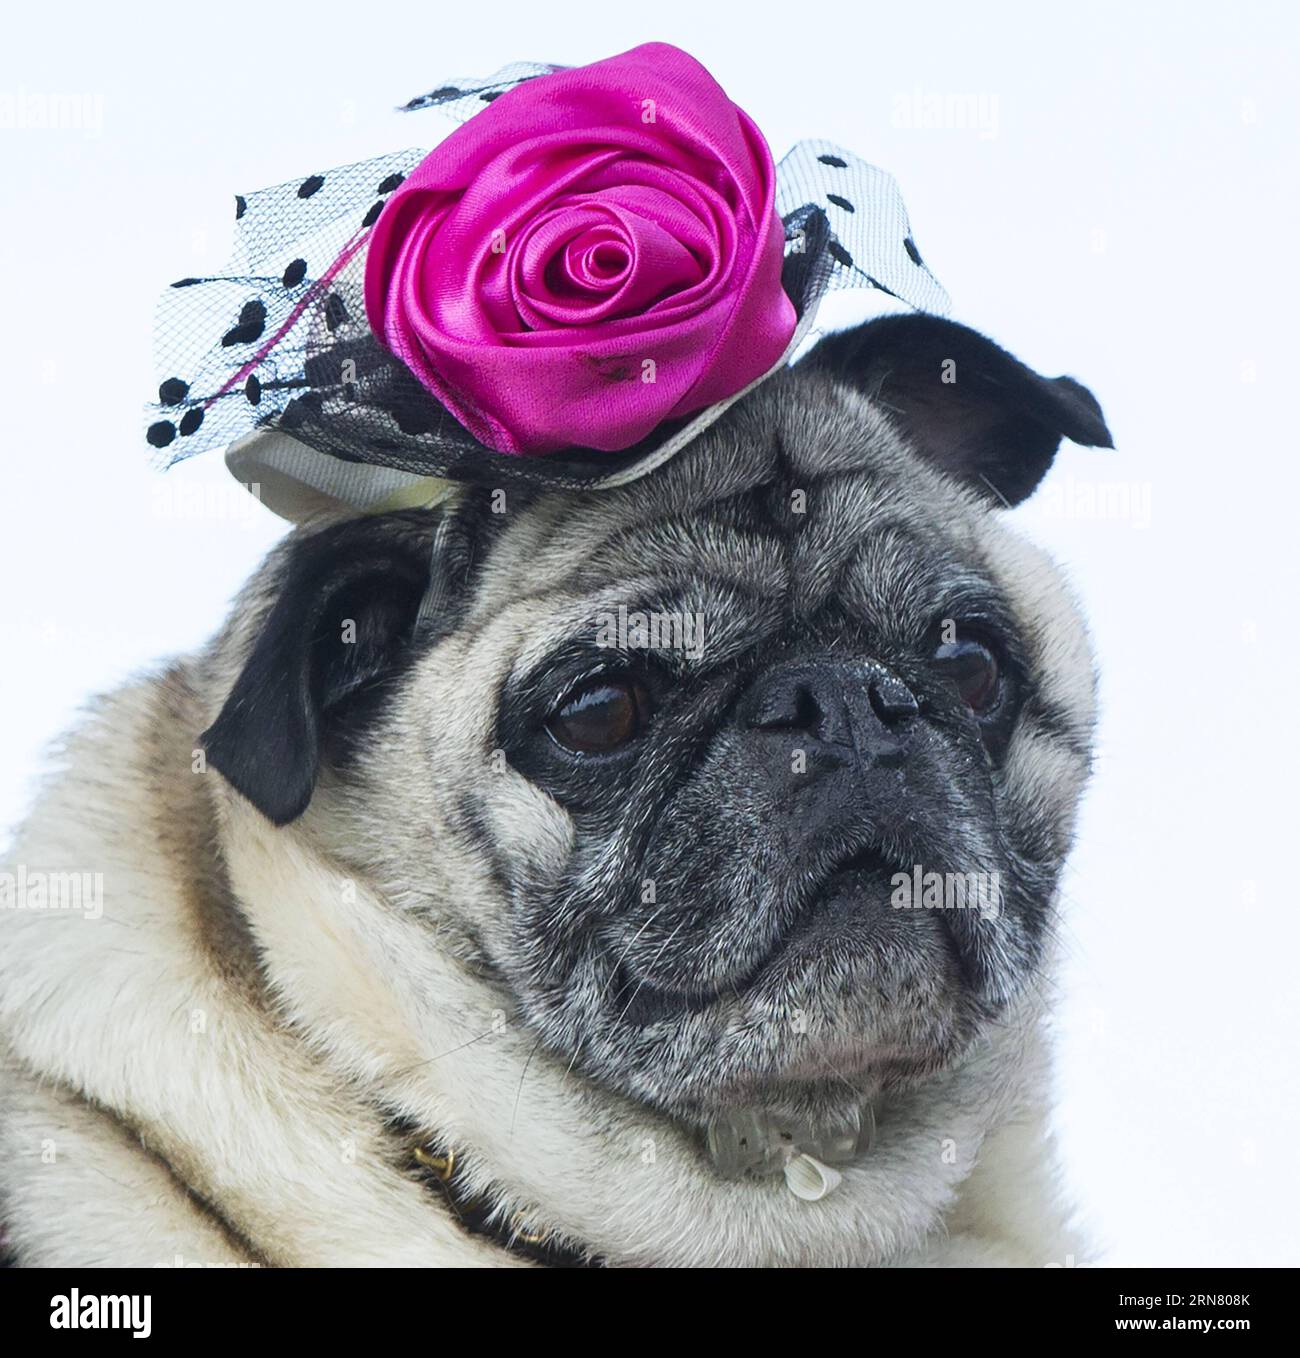 (150927) -- TORONTO, Sept. 27, 2015 -- A dressed up pet dog is seen on stage during the fashion show event of the 2015 Woofstock at Woodbine Park in Toronto, Canada, Sept. 27, 2015. Woofstock is the largest outdoor festival for dogs in North America. ) CANADA-TORONTO-WOOFSTOCK-PET DOG-FASHION SHOW ZouxZheng PUBLICATIONxNOTxINxCHN   Toronto Sept 27 2015 a Dressed up Pet Dog IS Lakes ON Stage during The Fashion Show Event of The 2015 Woofstock AT Woodbine Park in Toronto Canada Sept 27 2015 Woofstock IS The Largest Outdoor Festival for Dogs in North America Canada Toronto Woofstock Pet Dog Fashi Stock Photo